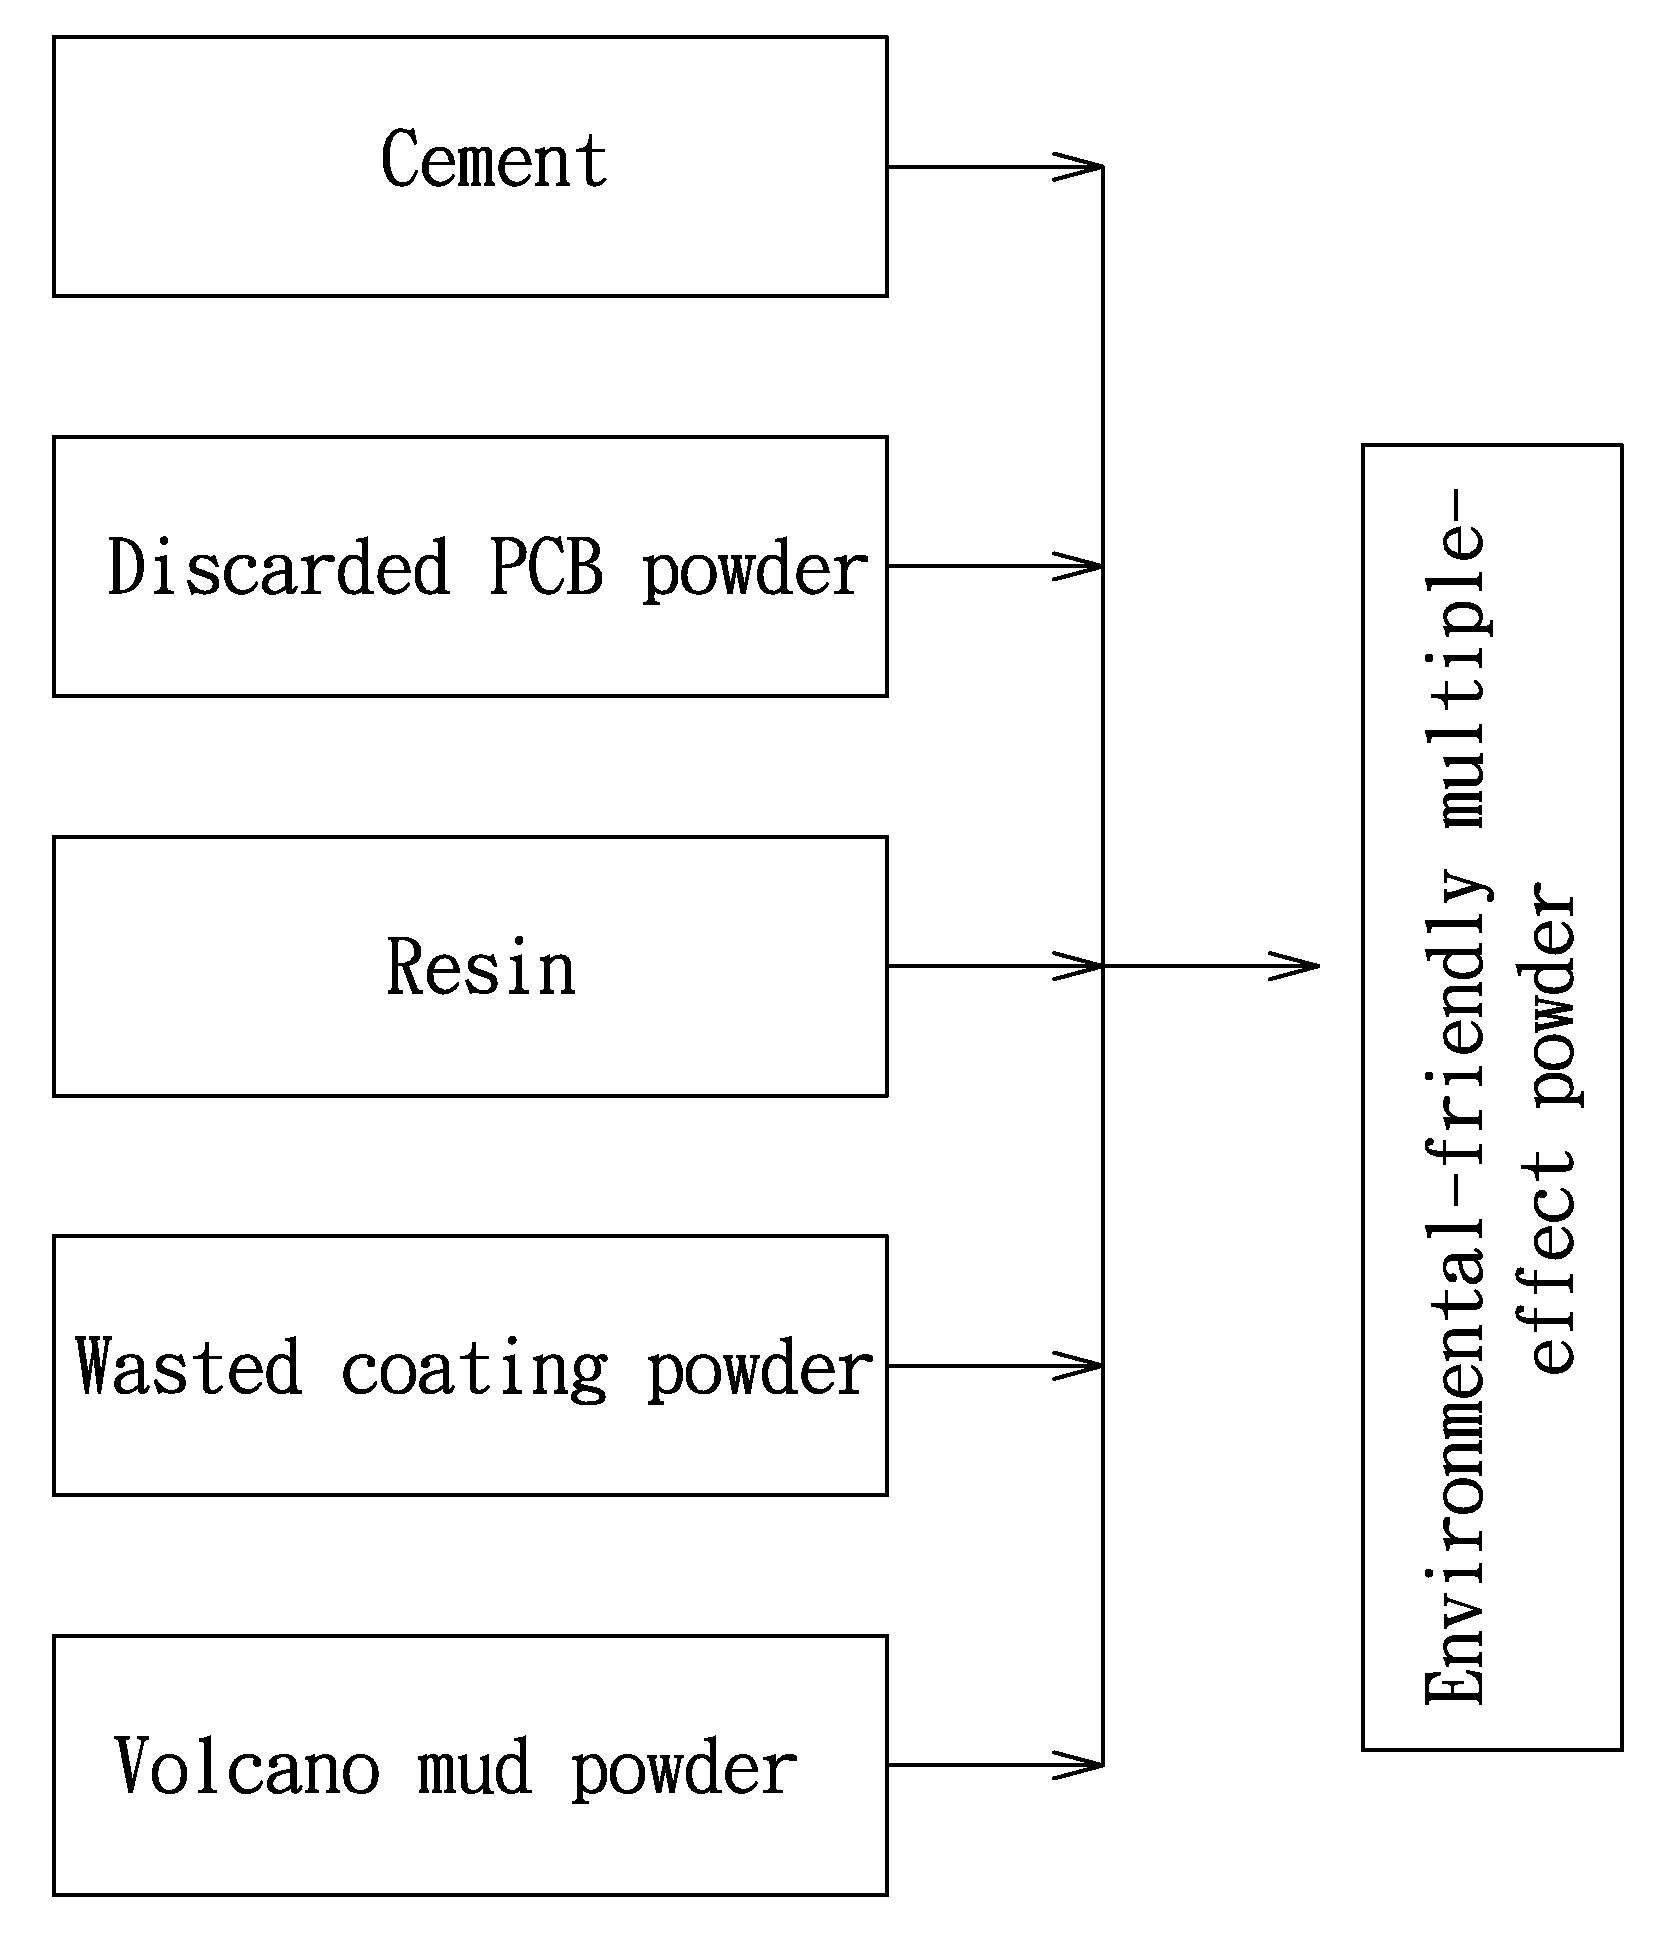 Compositions and processing methods of environmental-friendly multiple-effect powder